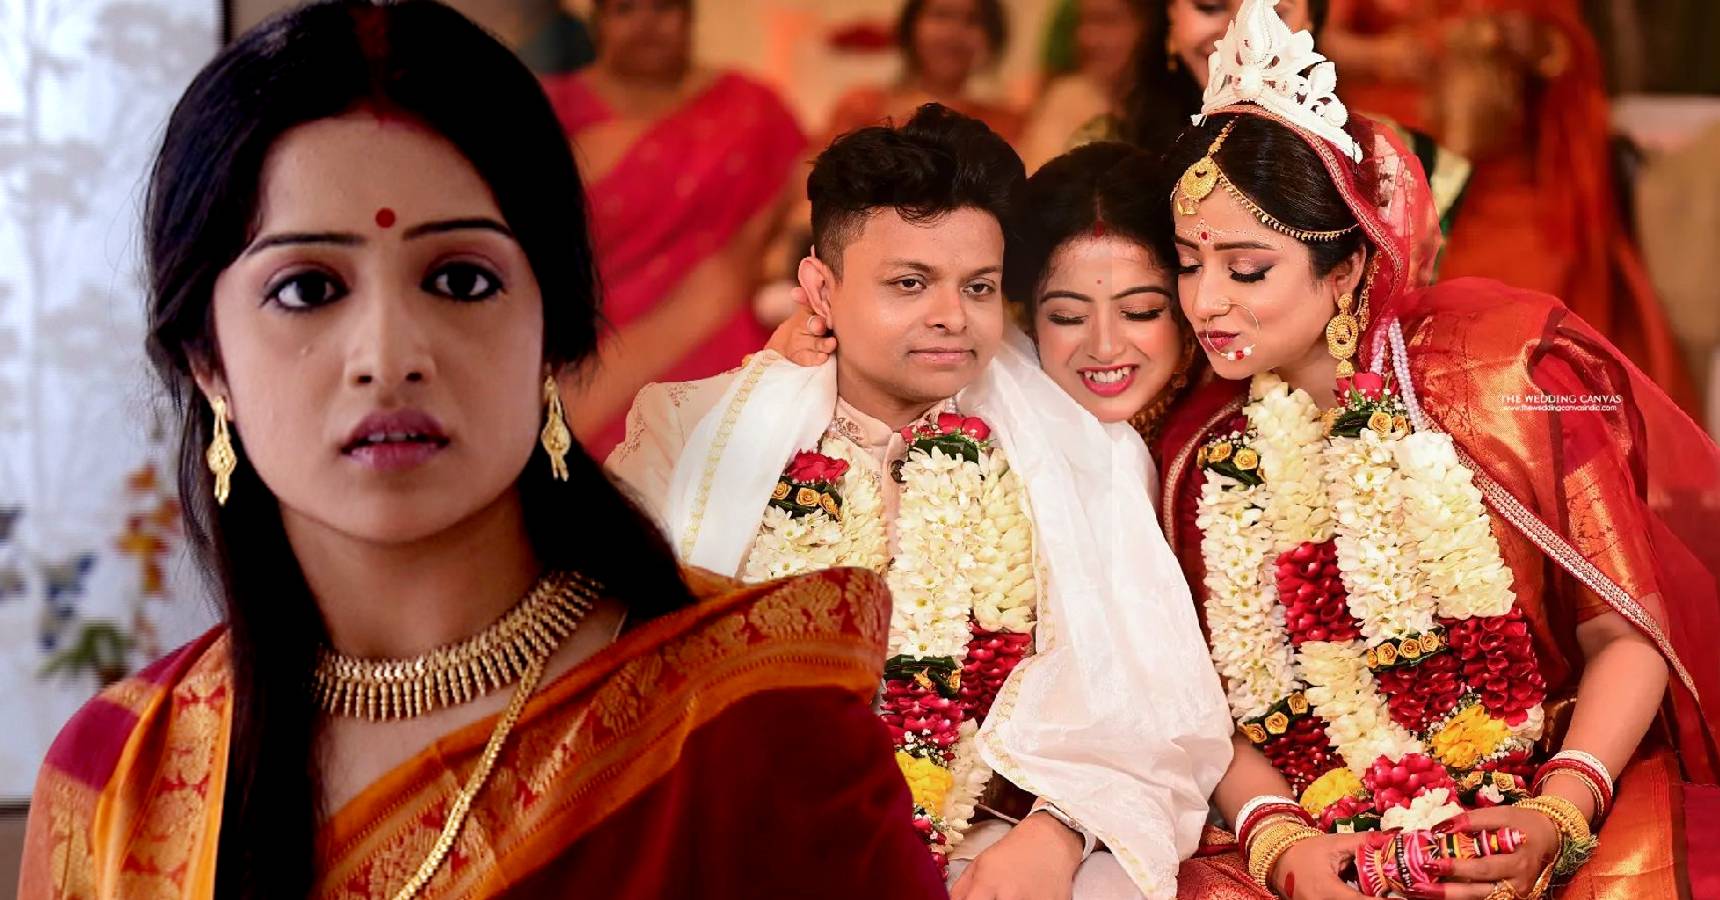 Roosha Chatterjee Shared Photo with Husband after Marriage goes viral on social media